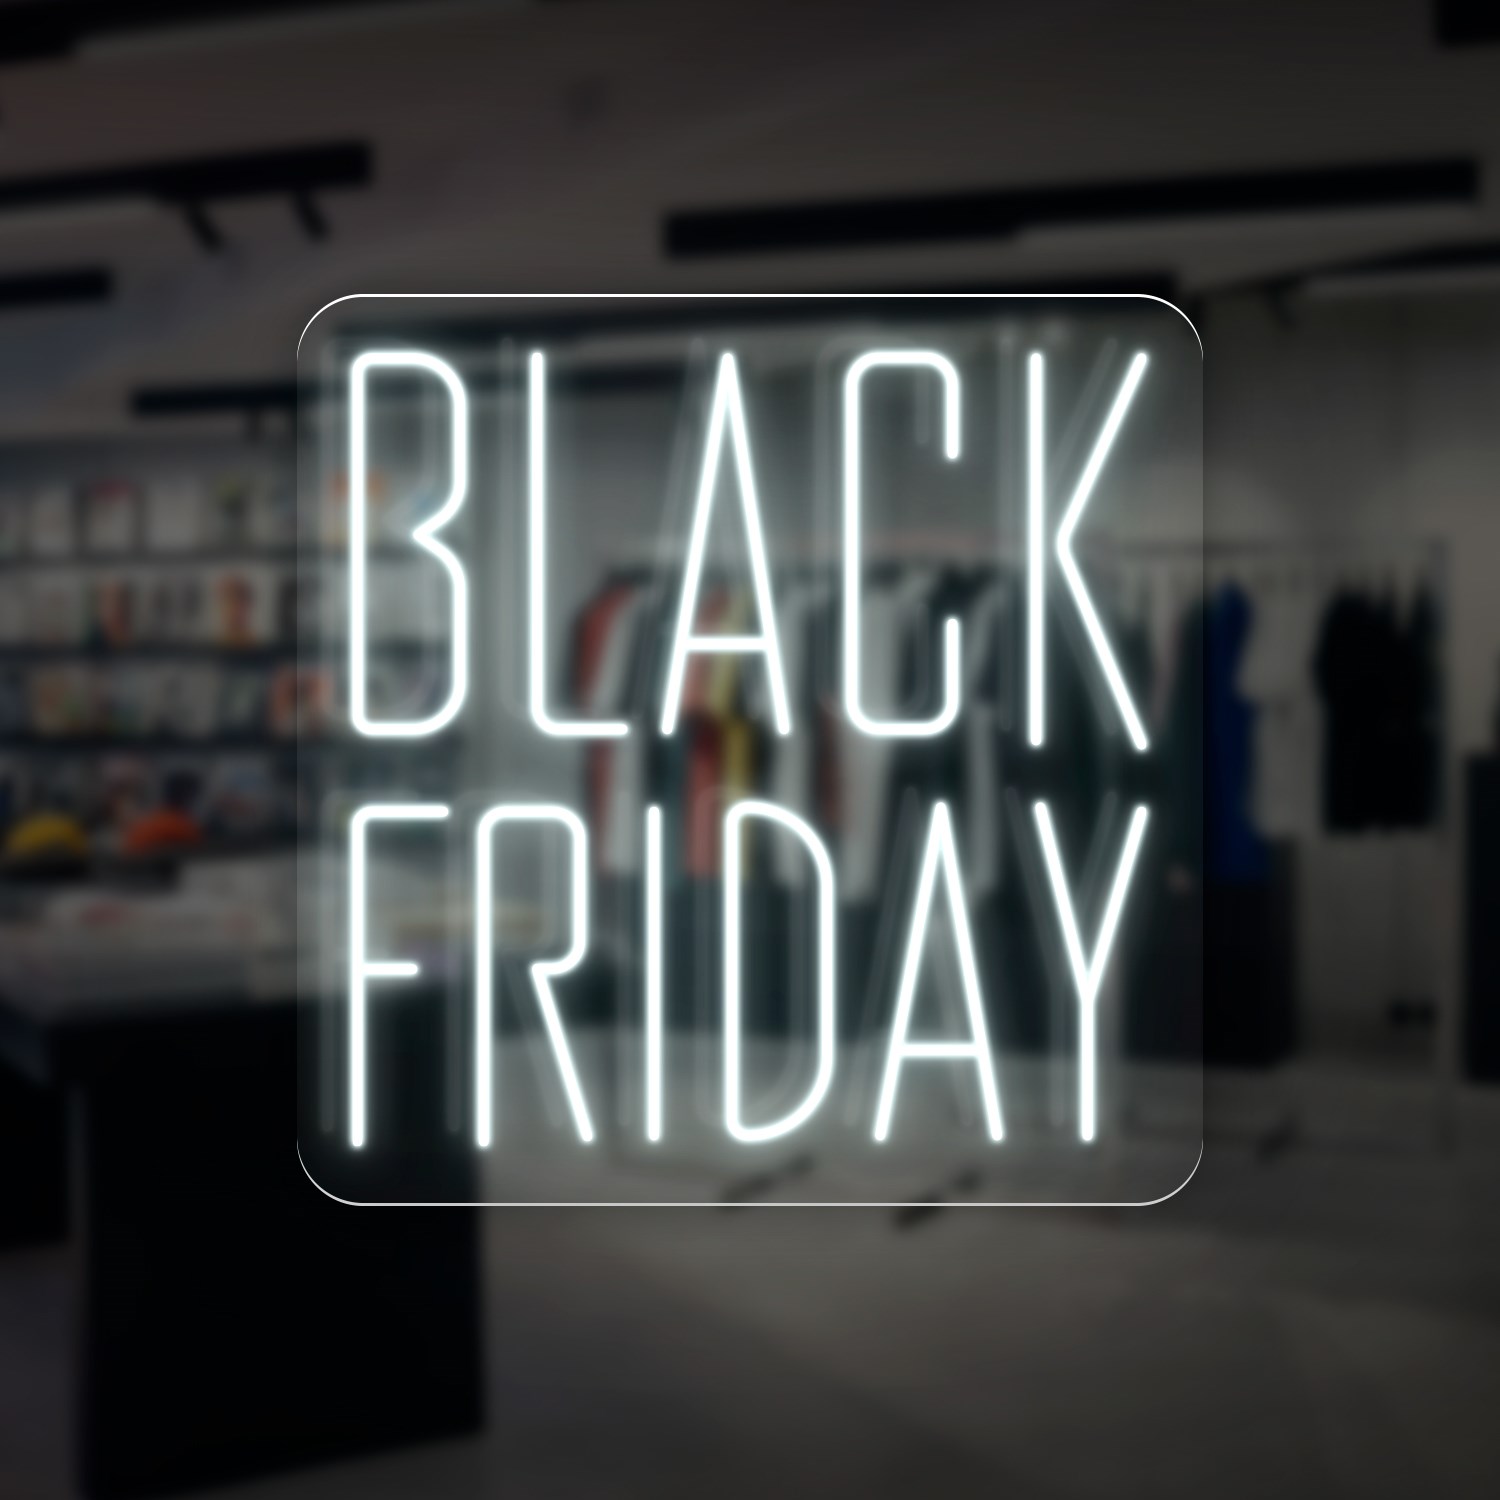 Picture of Black Friday Neon Sign